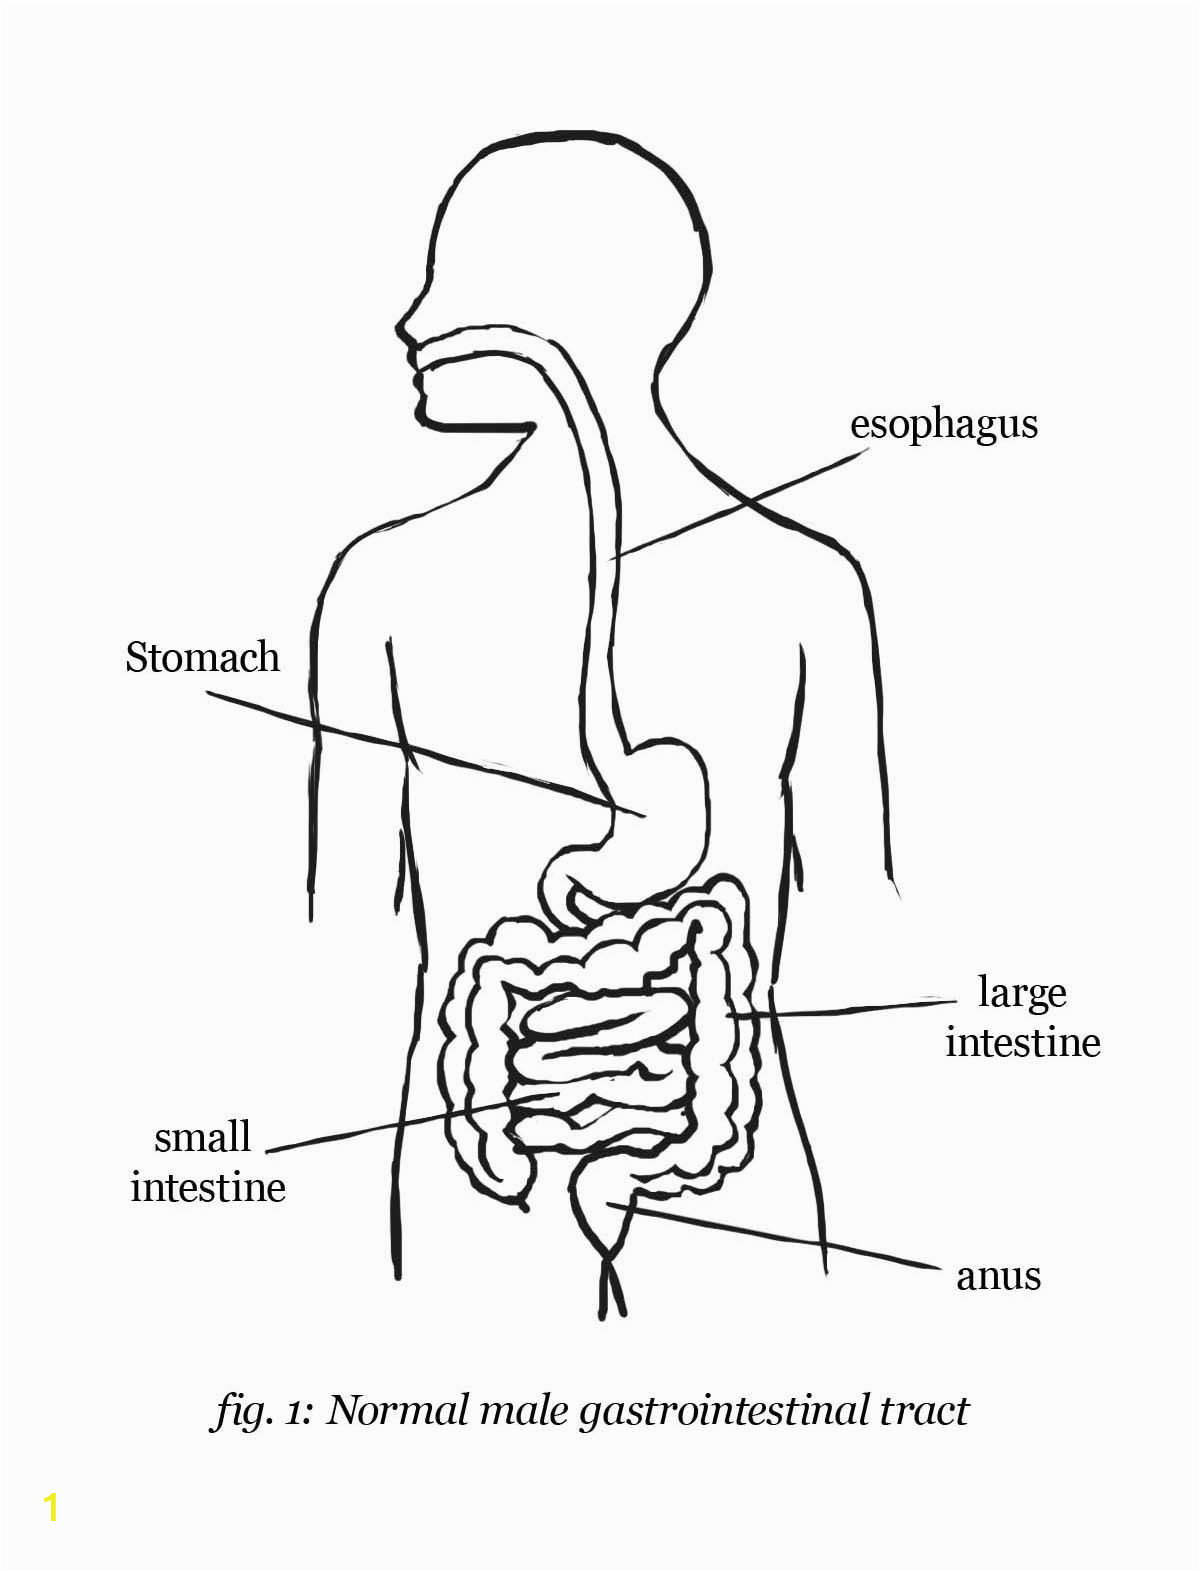 Digestive System Coloring Page for Kids Digestive System Coloring Page Coloring Home